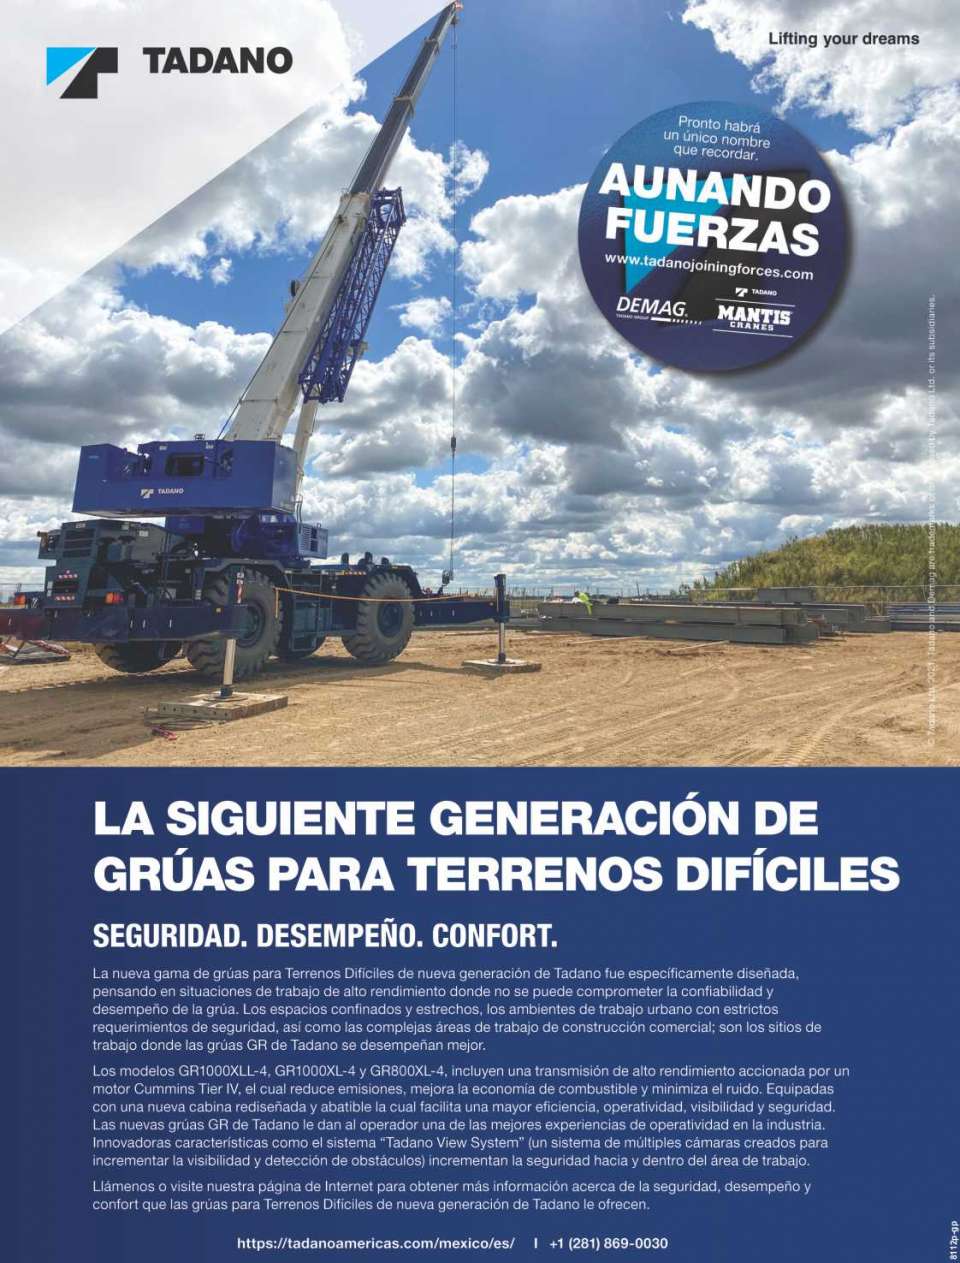 New range of new generation rough terrain cranes from Tadano designed for high performance work. Models GR1000XLL-4, GR1000XL-4 and GR800XL-4.